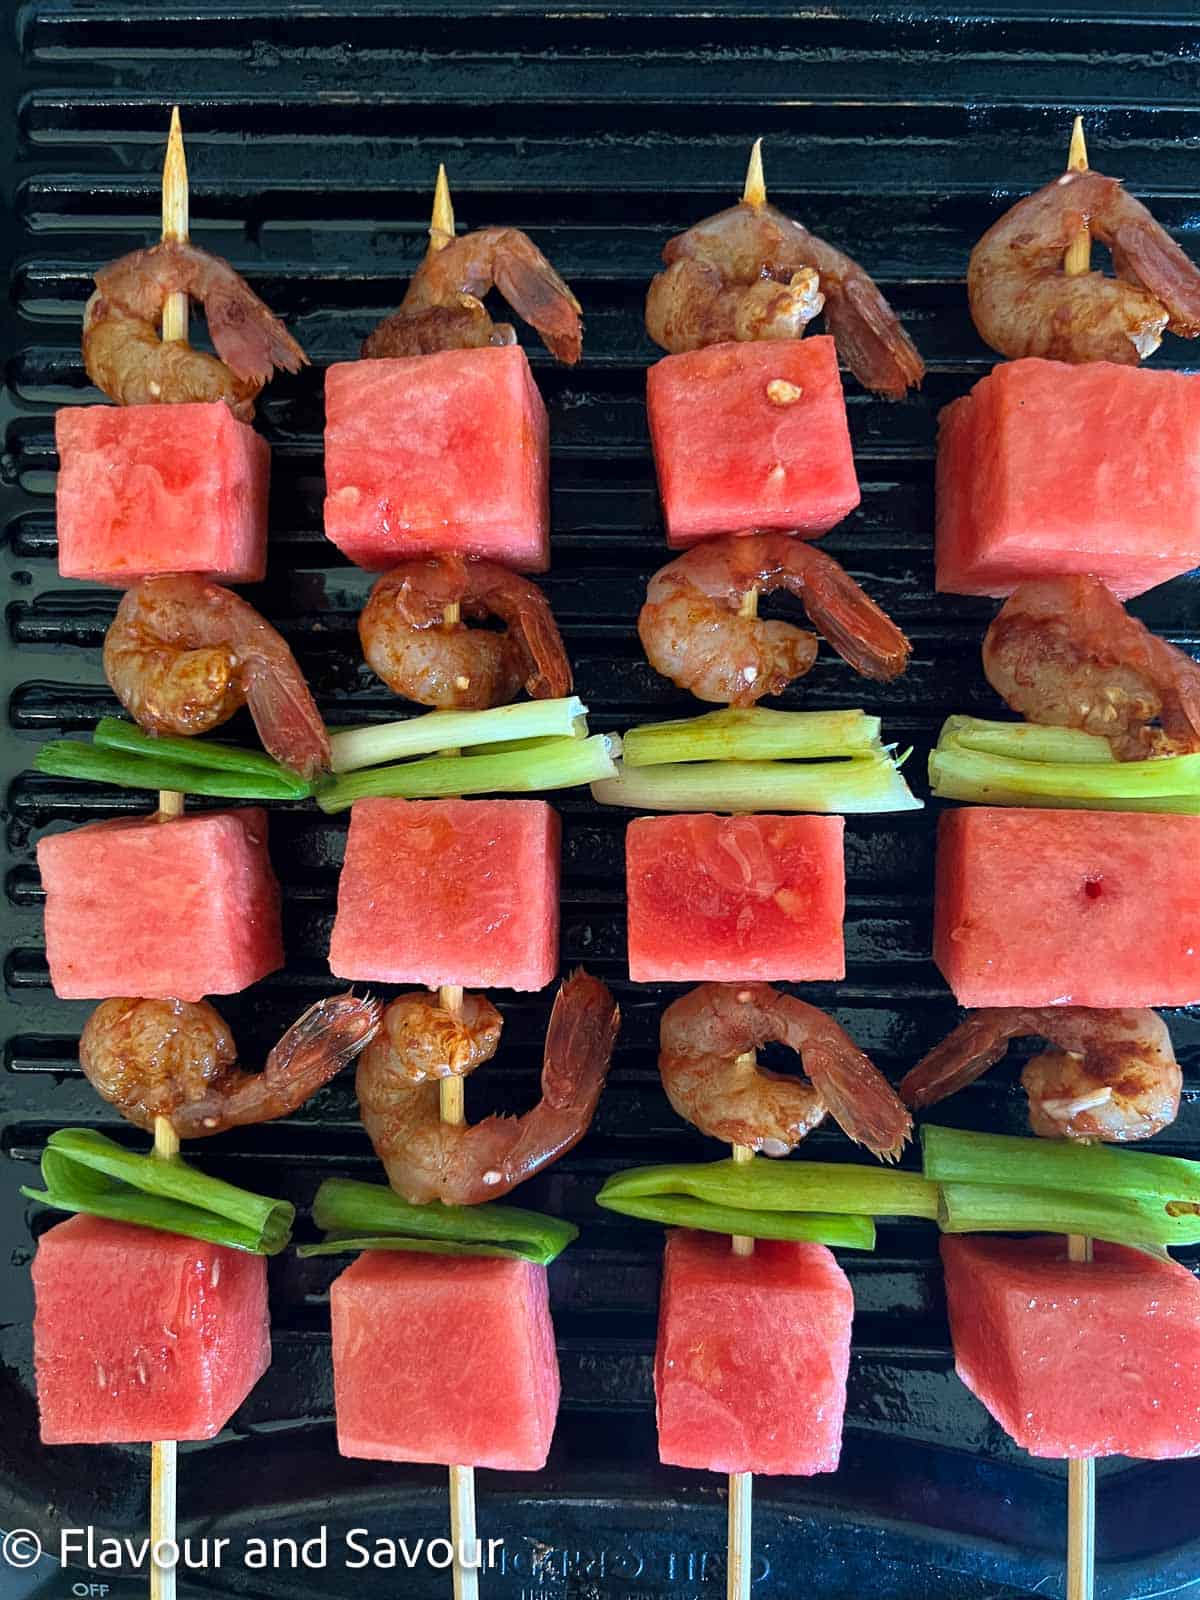 Skewers of watermelon, green onions and spot prawns on an indoor grill.